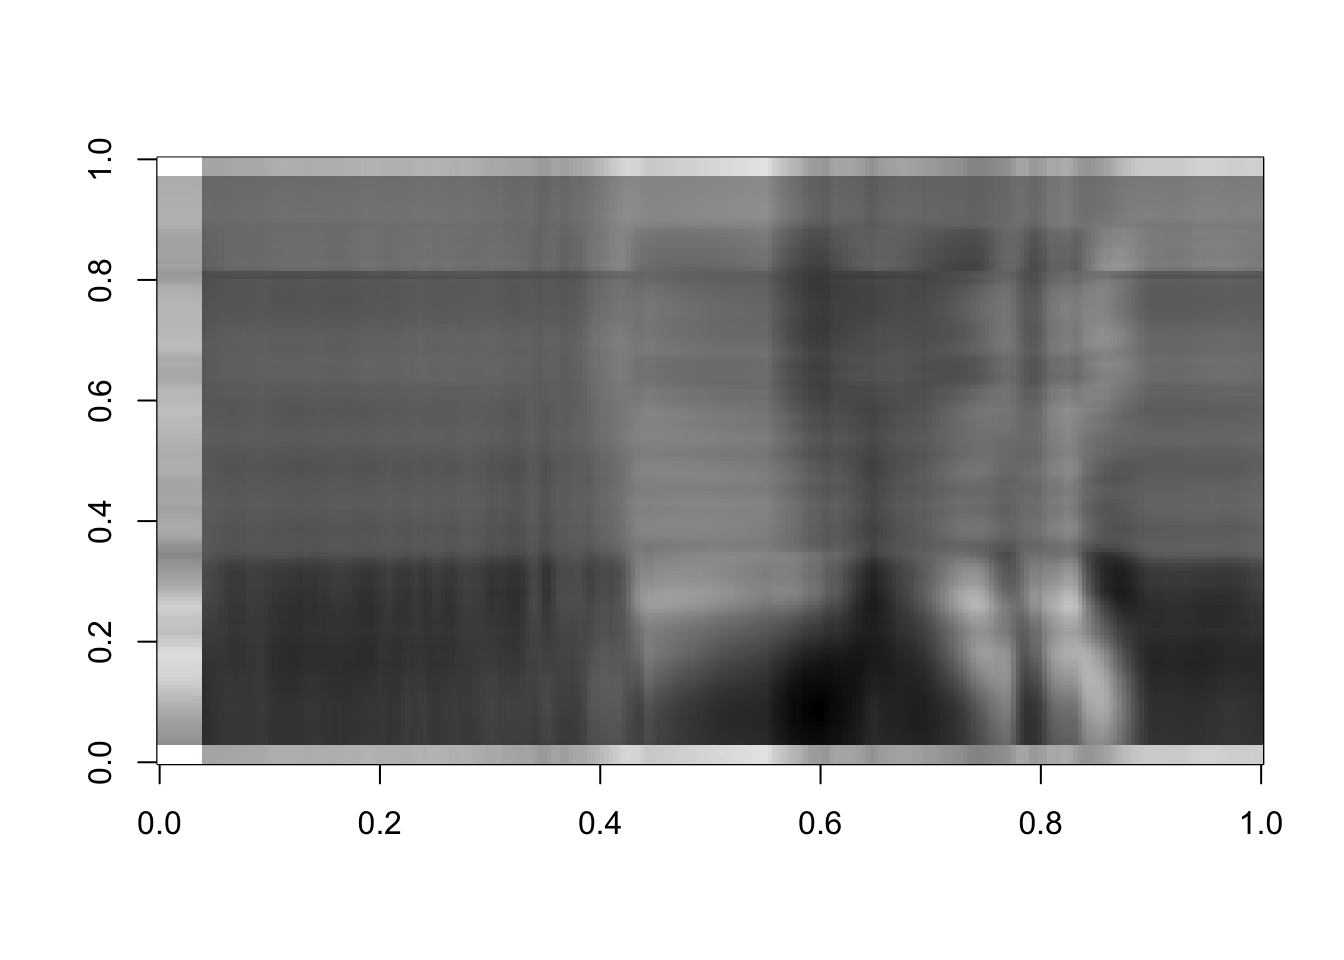 Rank 3 approximation of the image data